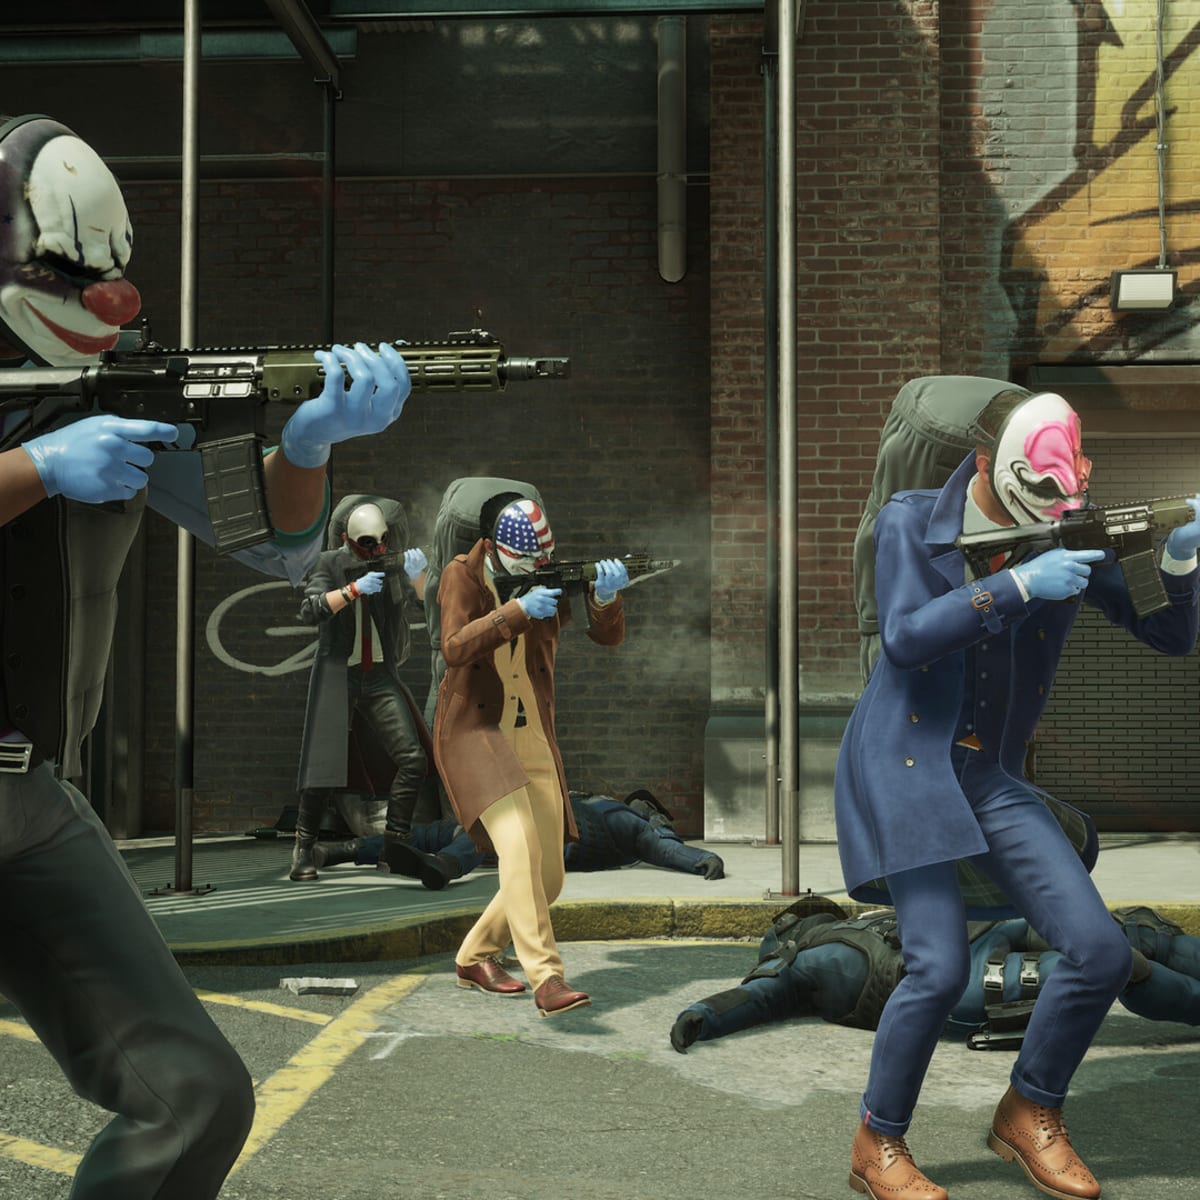 Will Payday 3 Be Crossplay? Payday 3 Gameplay, Trailer and More - News